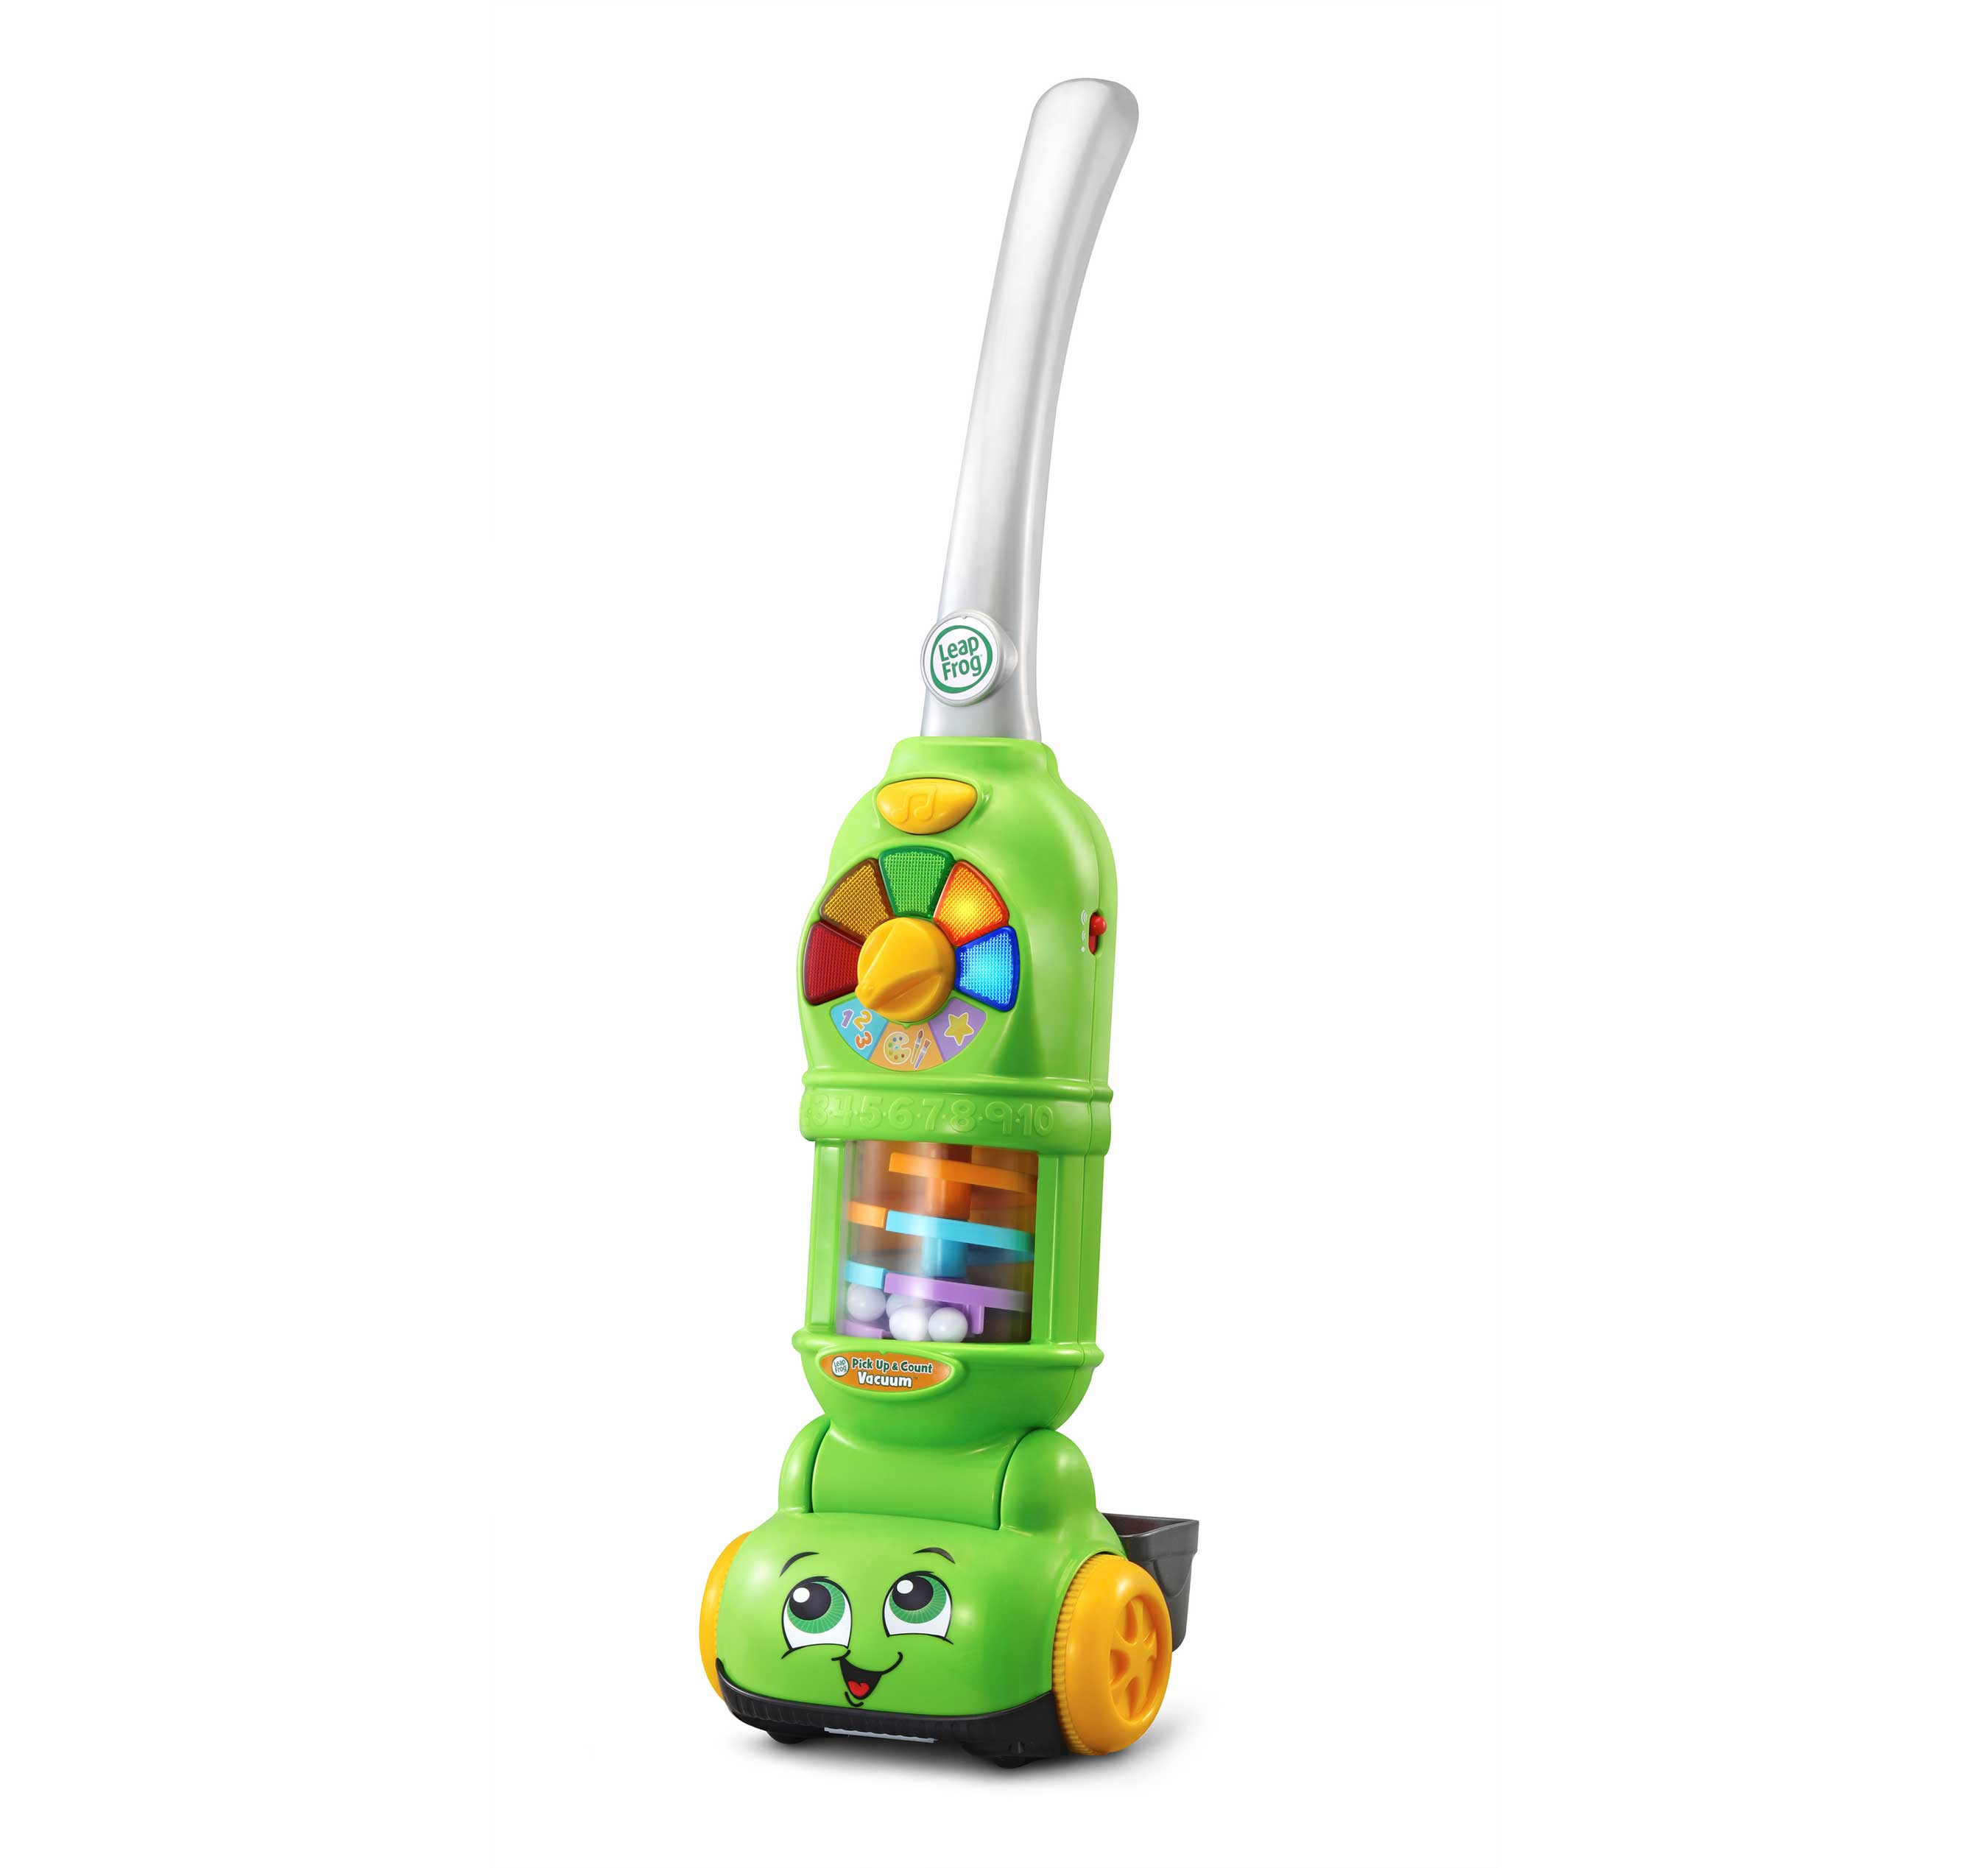 LeapFrog® introduces new infant and preschool learning toys, such as the Pick Up & Count Vacuum™.